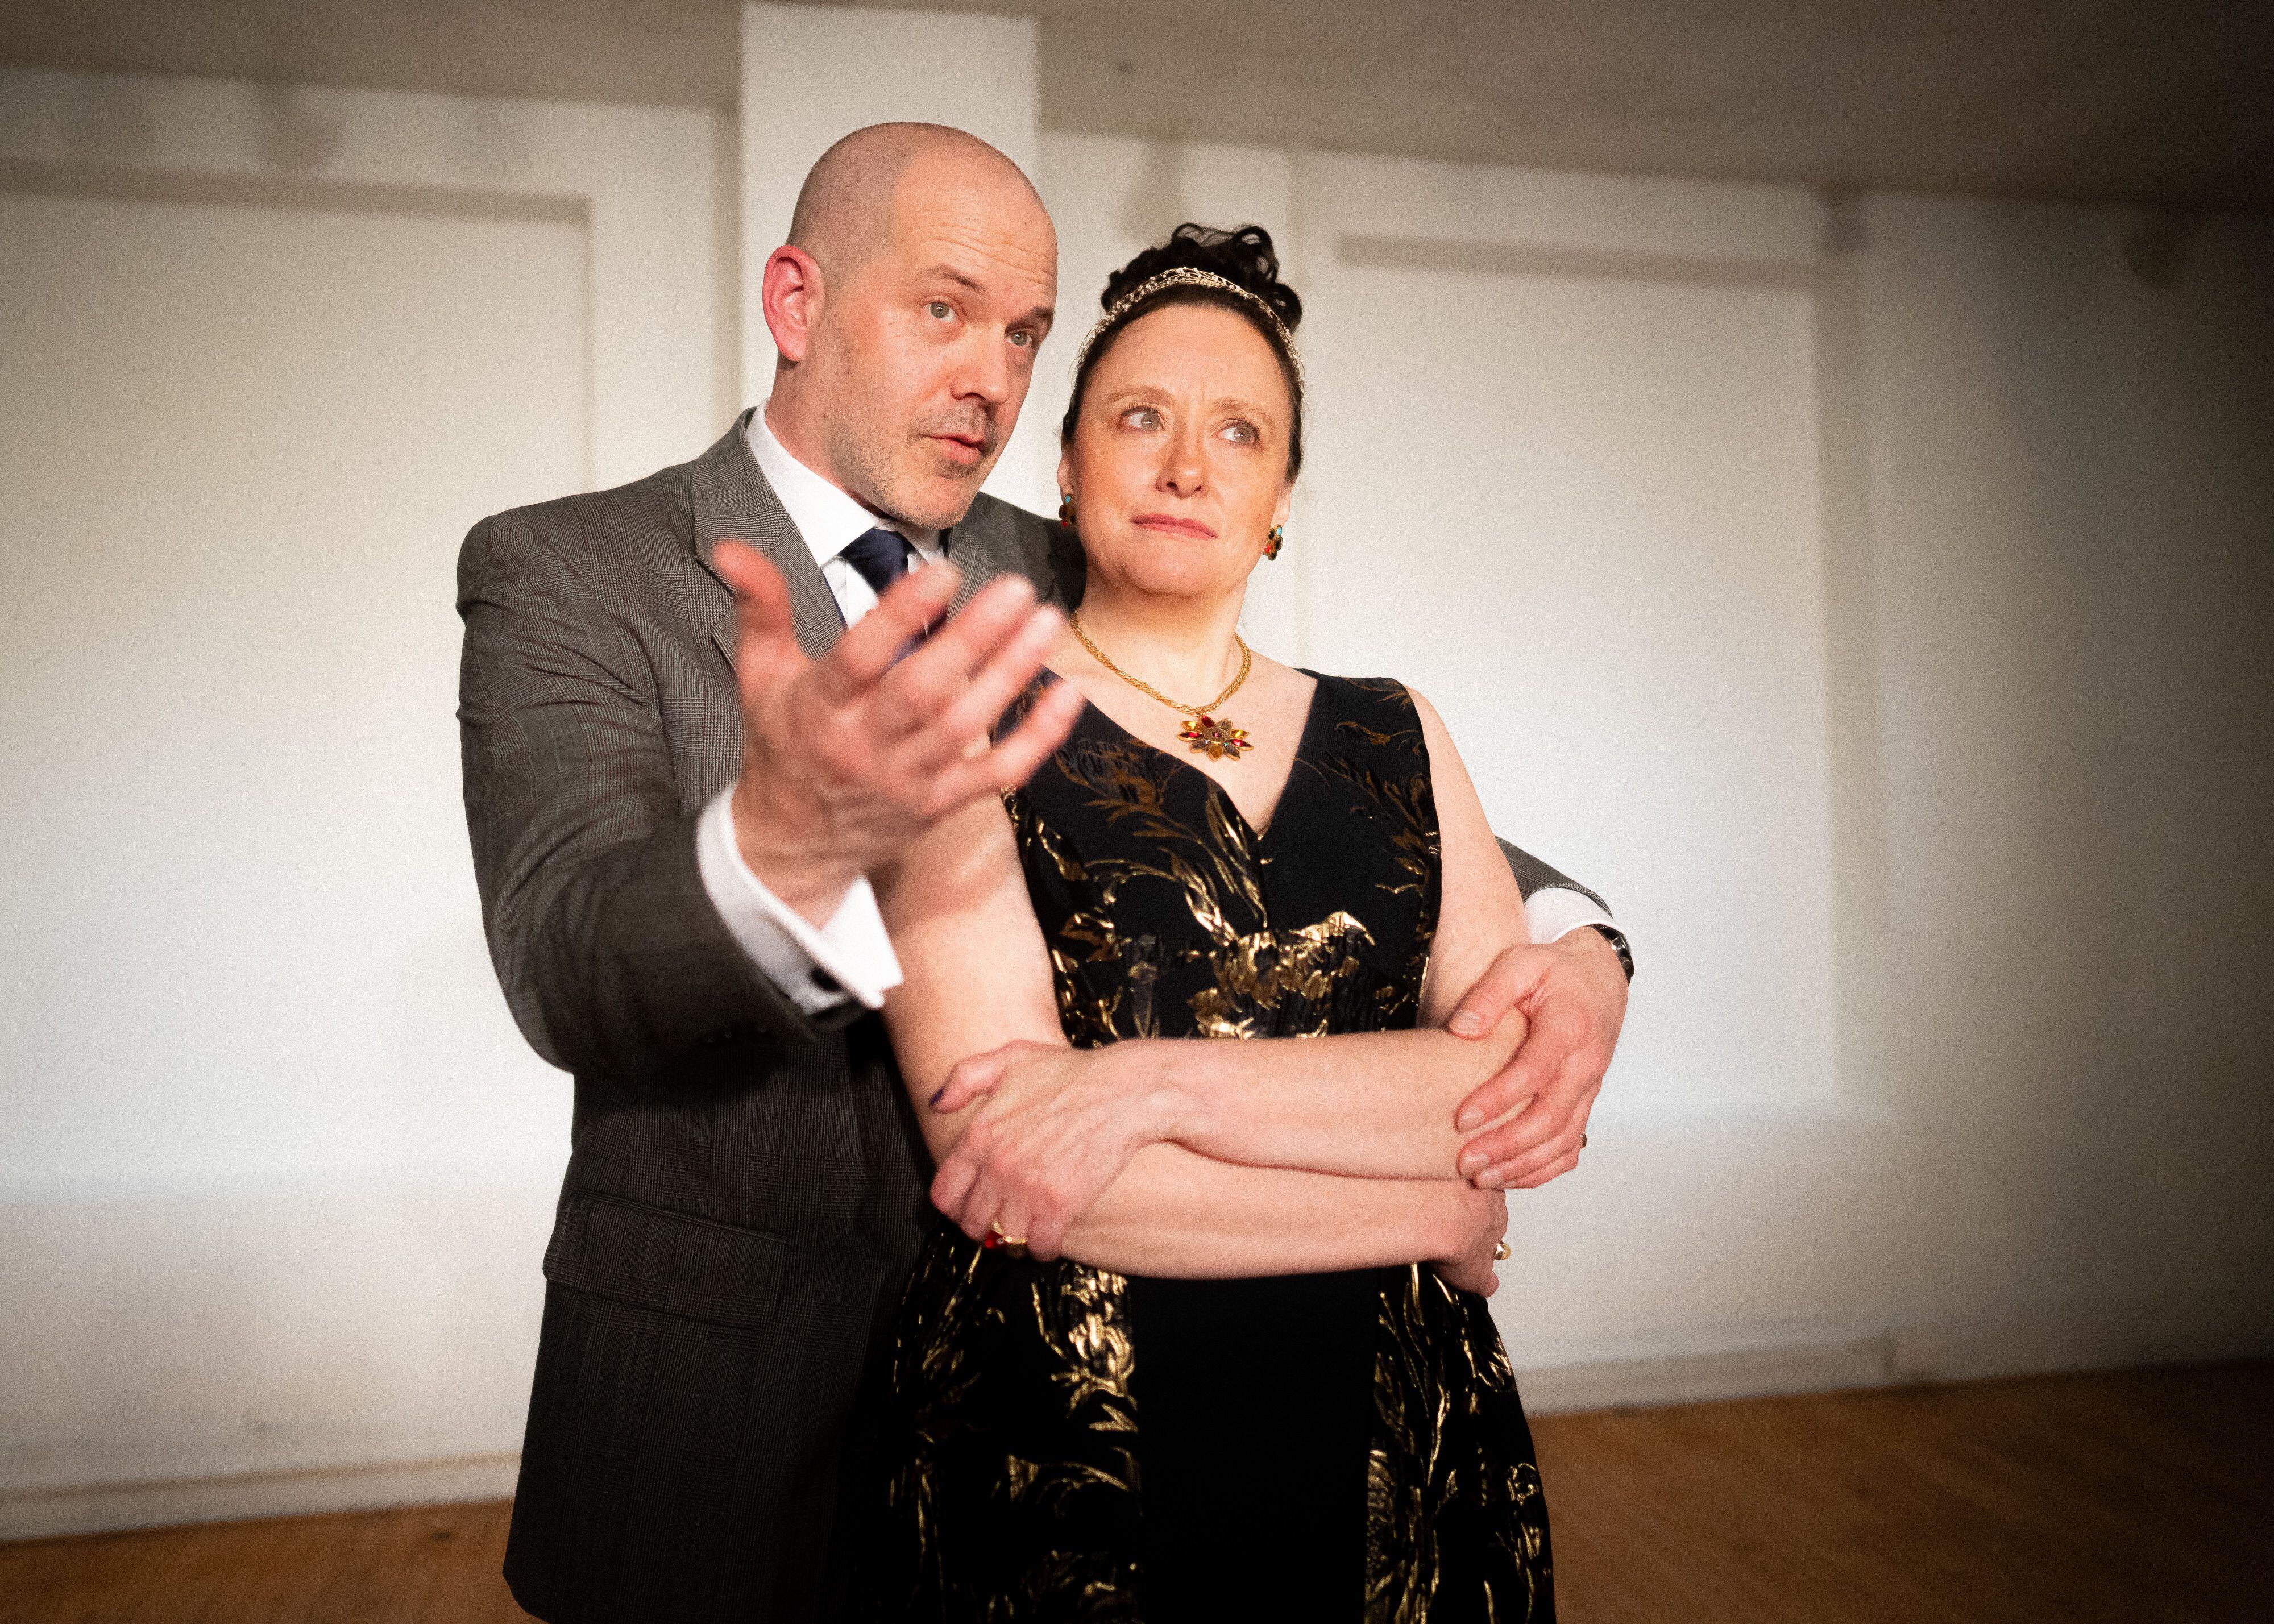 Elsinore, A Theatre Ensemble co-founders Jamie Ewing (as Leicester, from left) and Lori Rohr (Queen Elizabeth I) are part of the 10-member cast bringing 